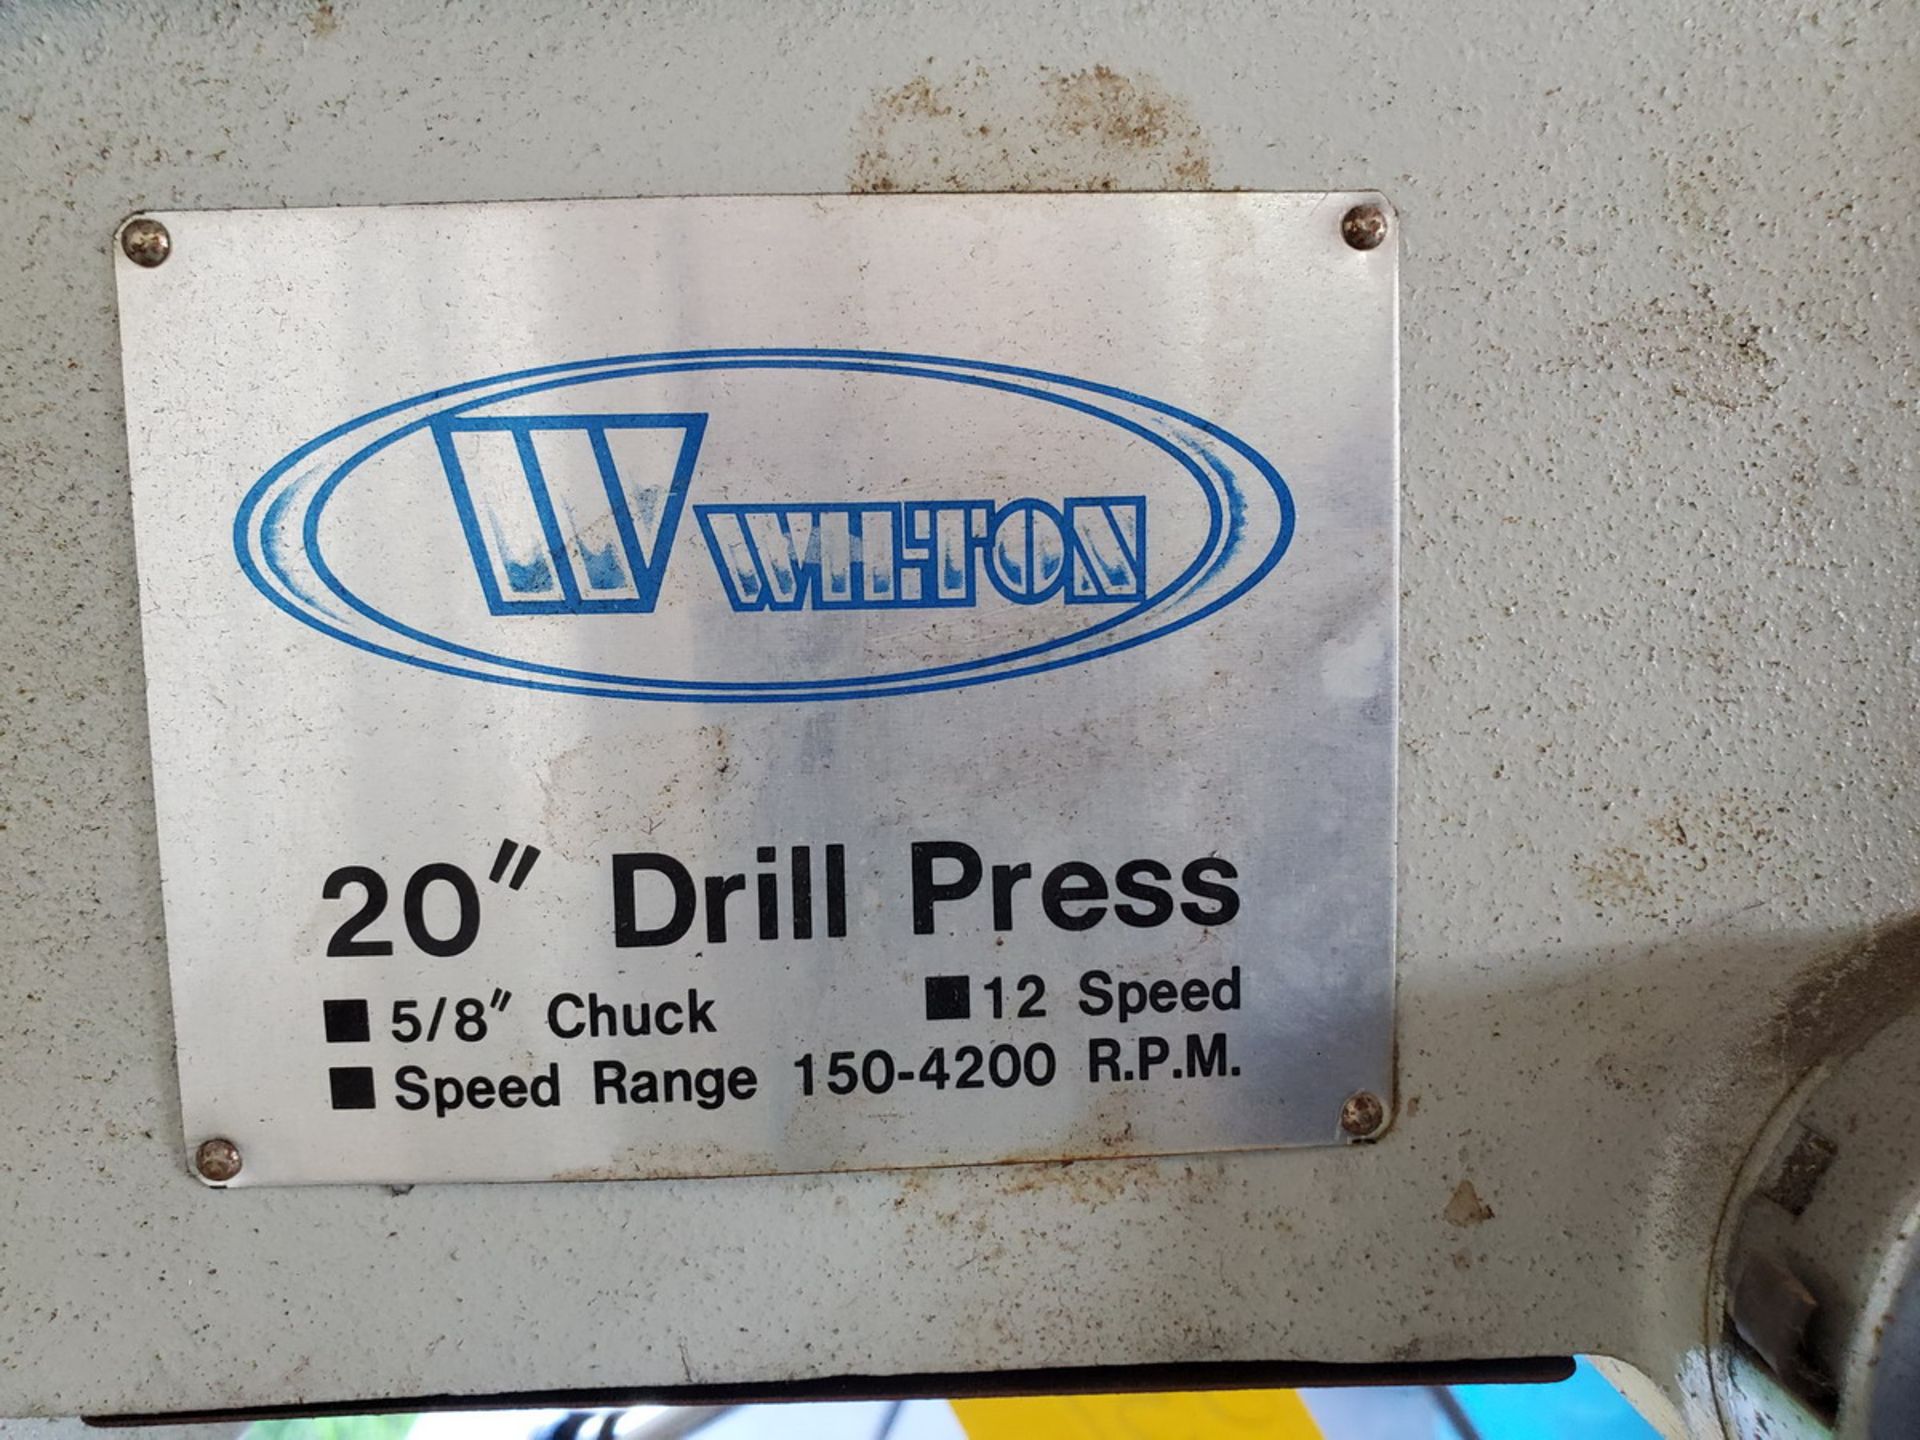 Wilton 20" Drill Press 12 Speed, 150-4200RPM; 16" x 14" Slot Table - Image 6 of 7